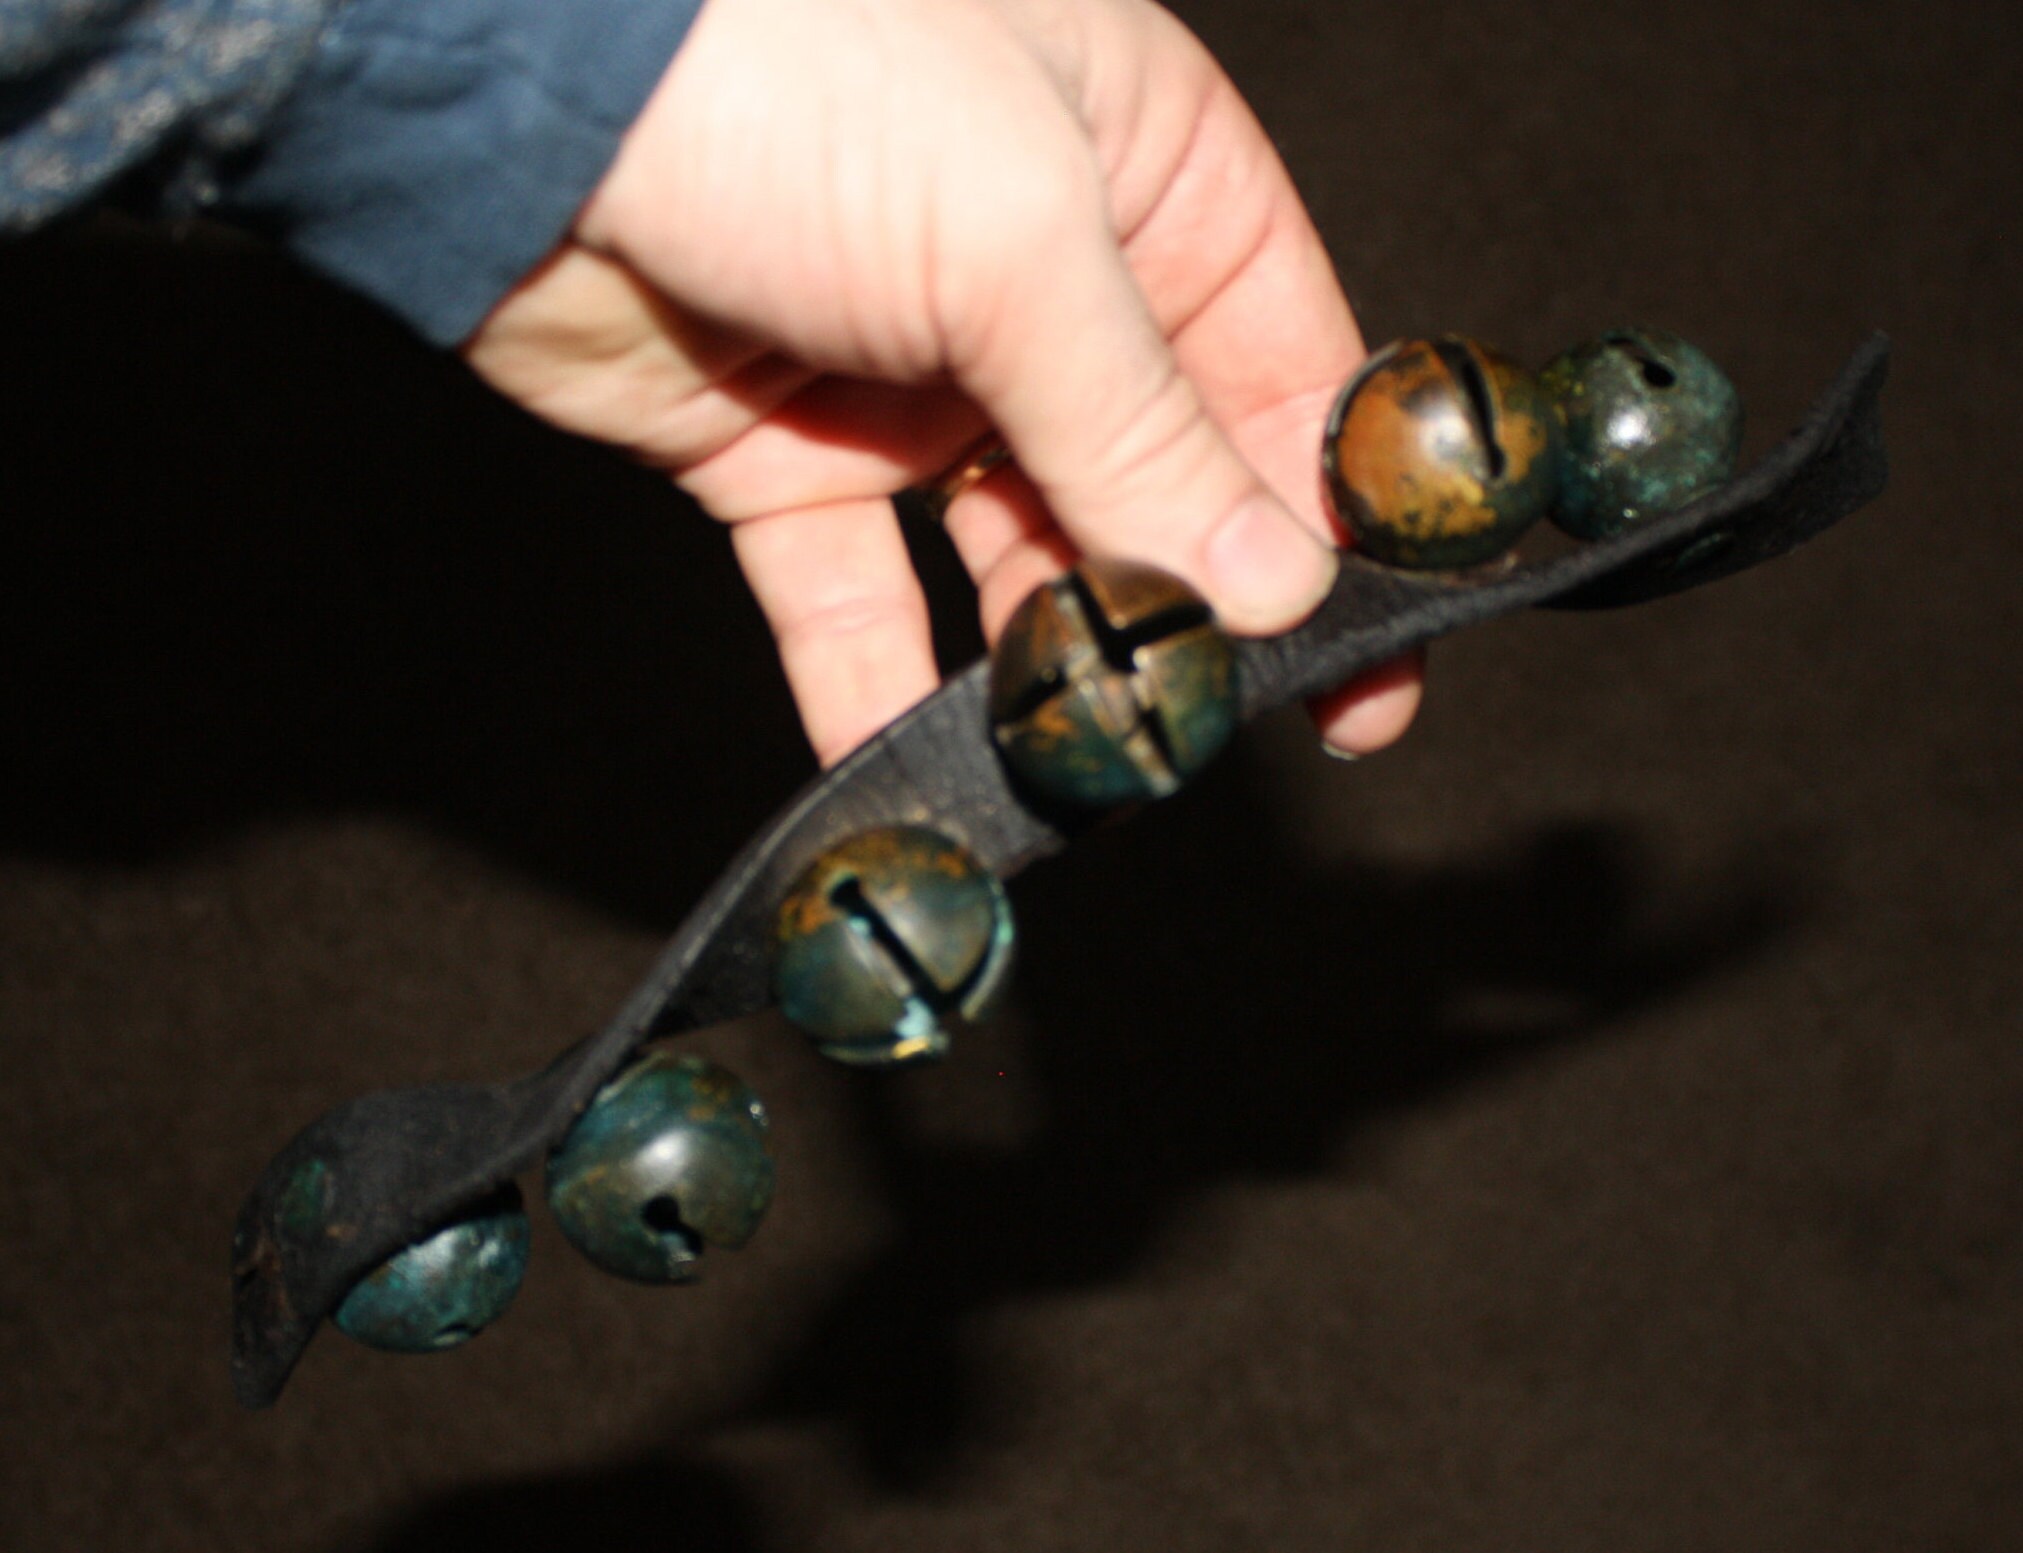 32 Brown, Antique Brass Sleigh Bells on Strap, Leather, #C-2128 – Weaver  Leather Supply